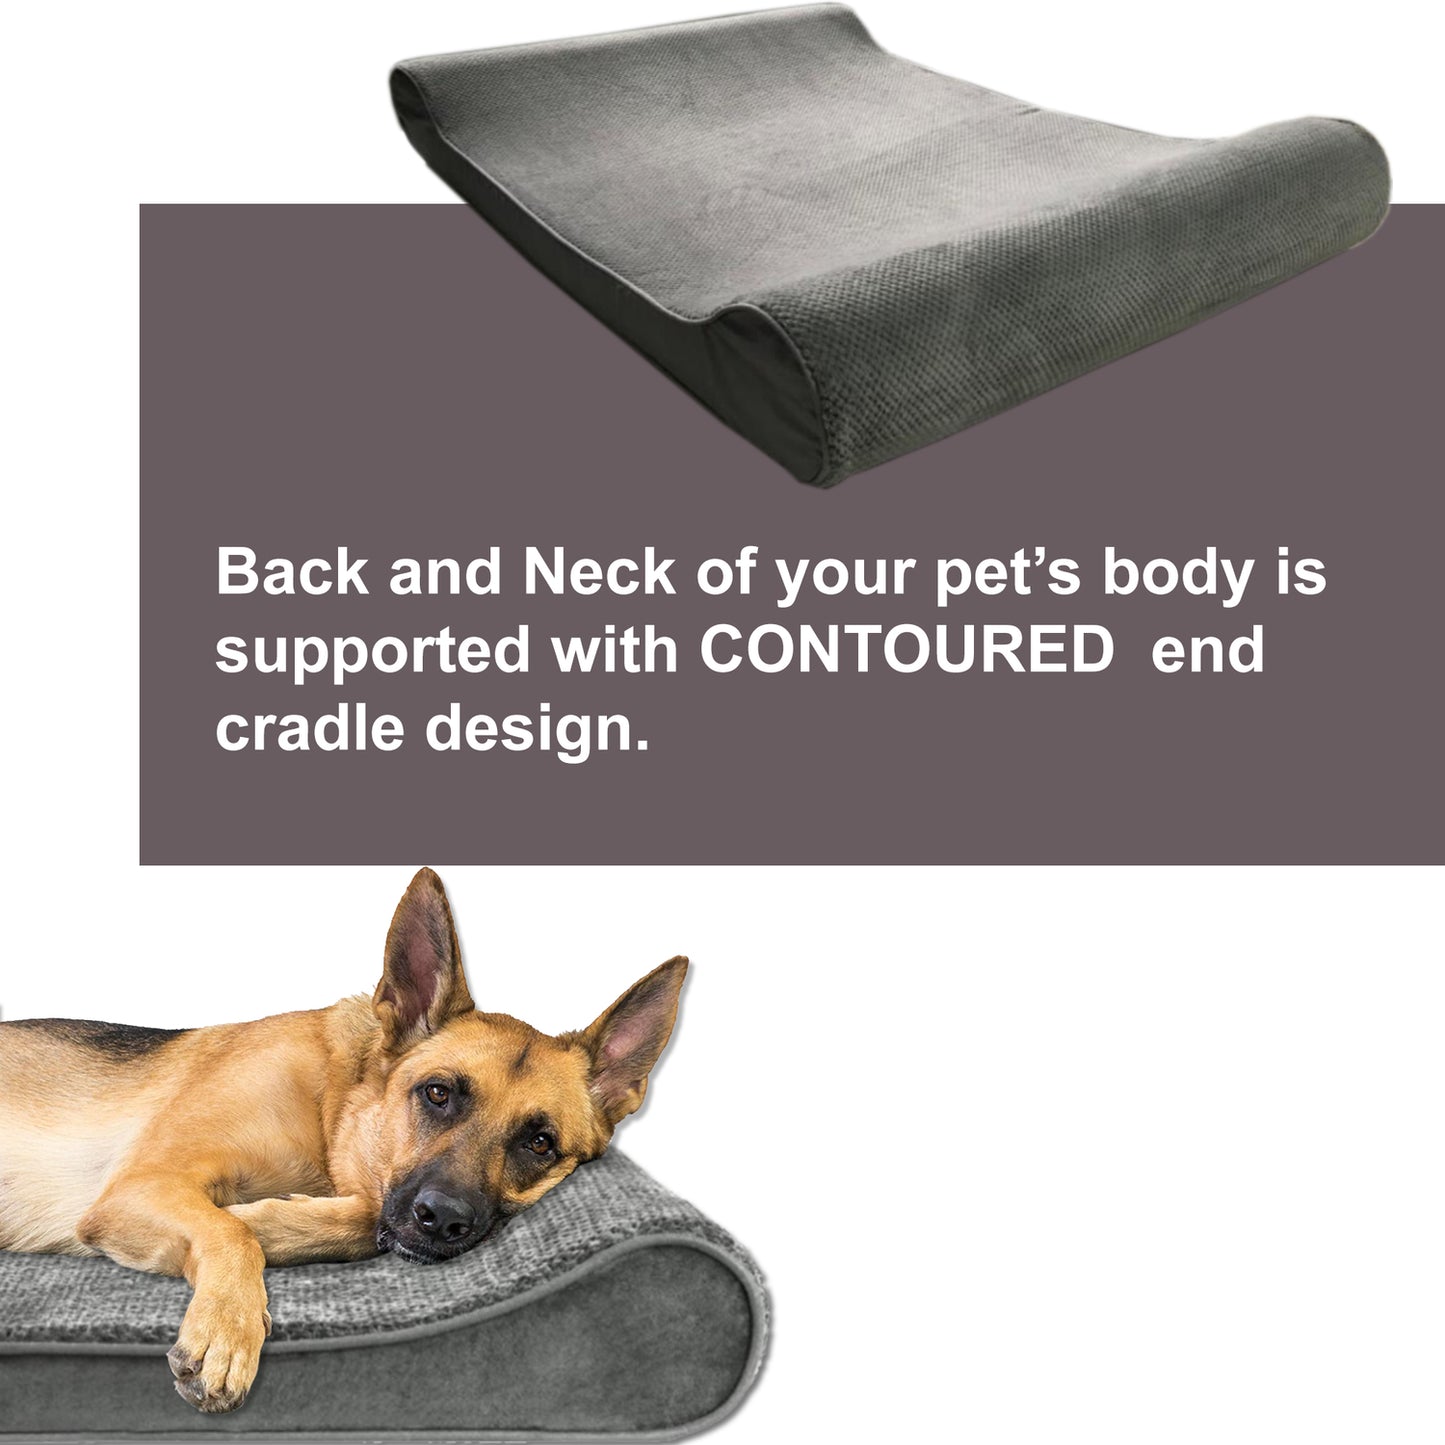 Mayton, Standard Foam Inner Waterproof with Corn Grain Pattrern Lounger Cradle Mattress Contour Pet Bed W/ Removable Cover for Dogs & Cats, Small - 24" X 36" X 5.5”